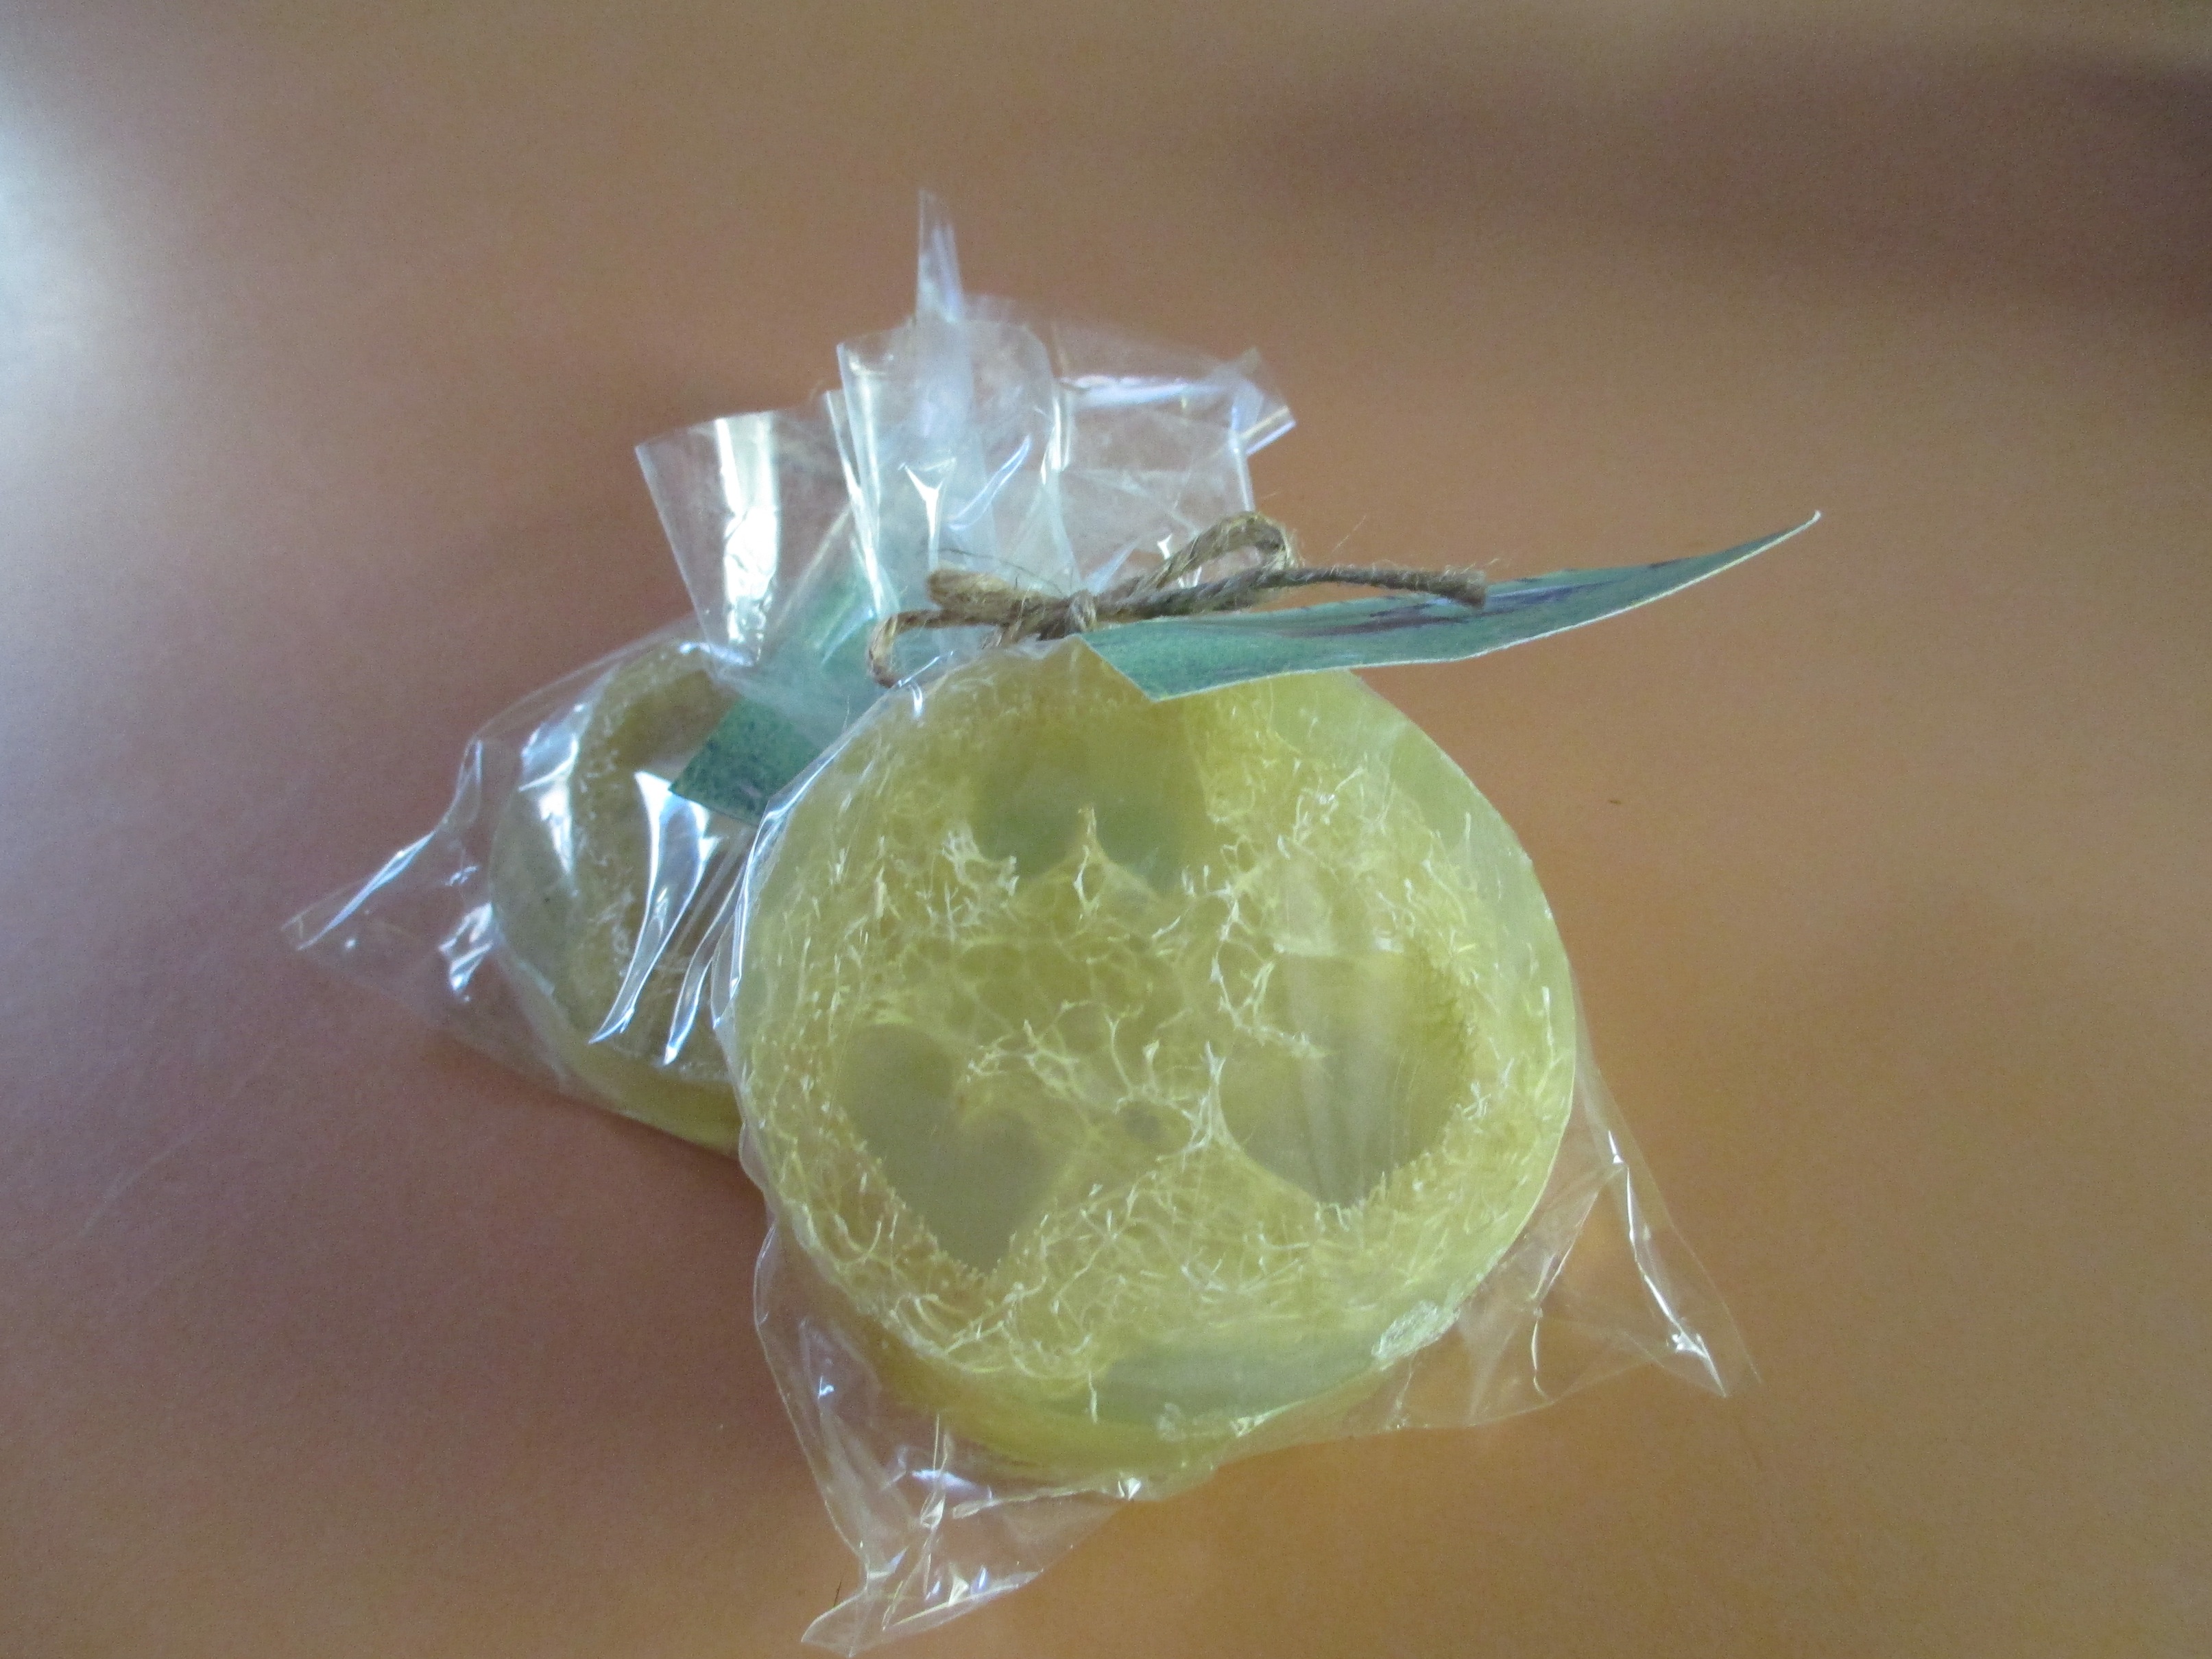 Completed Luffa Soap